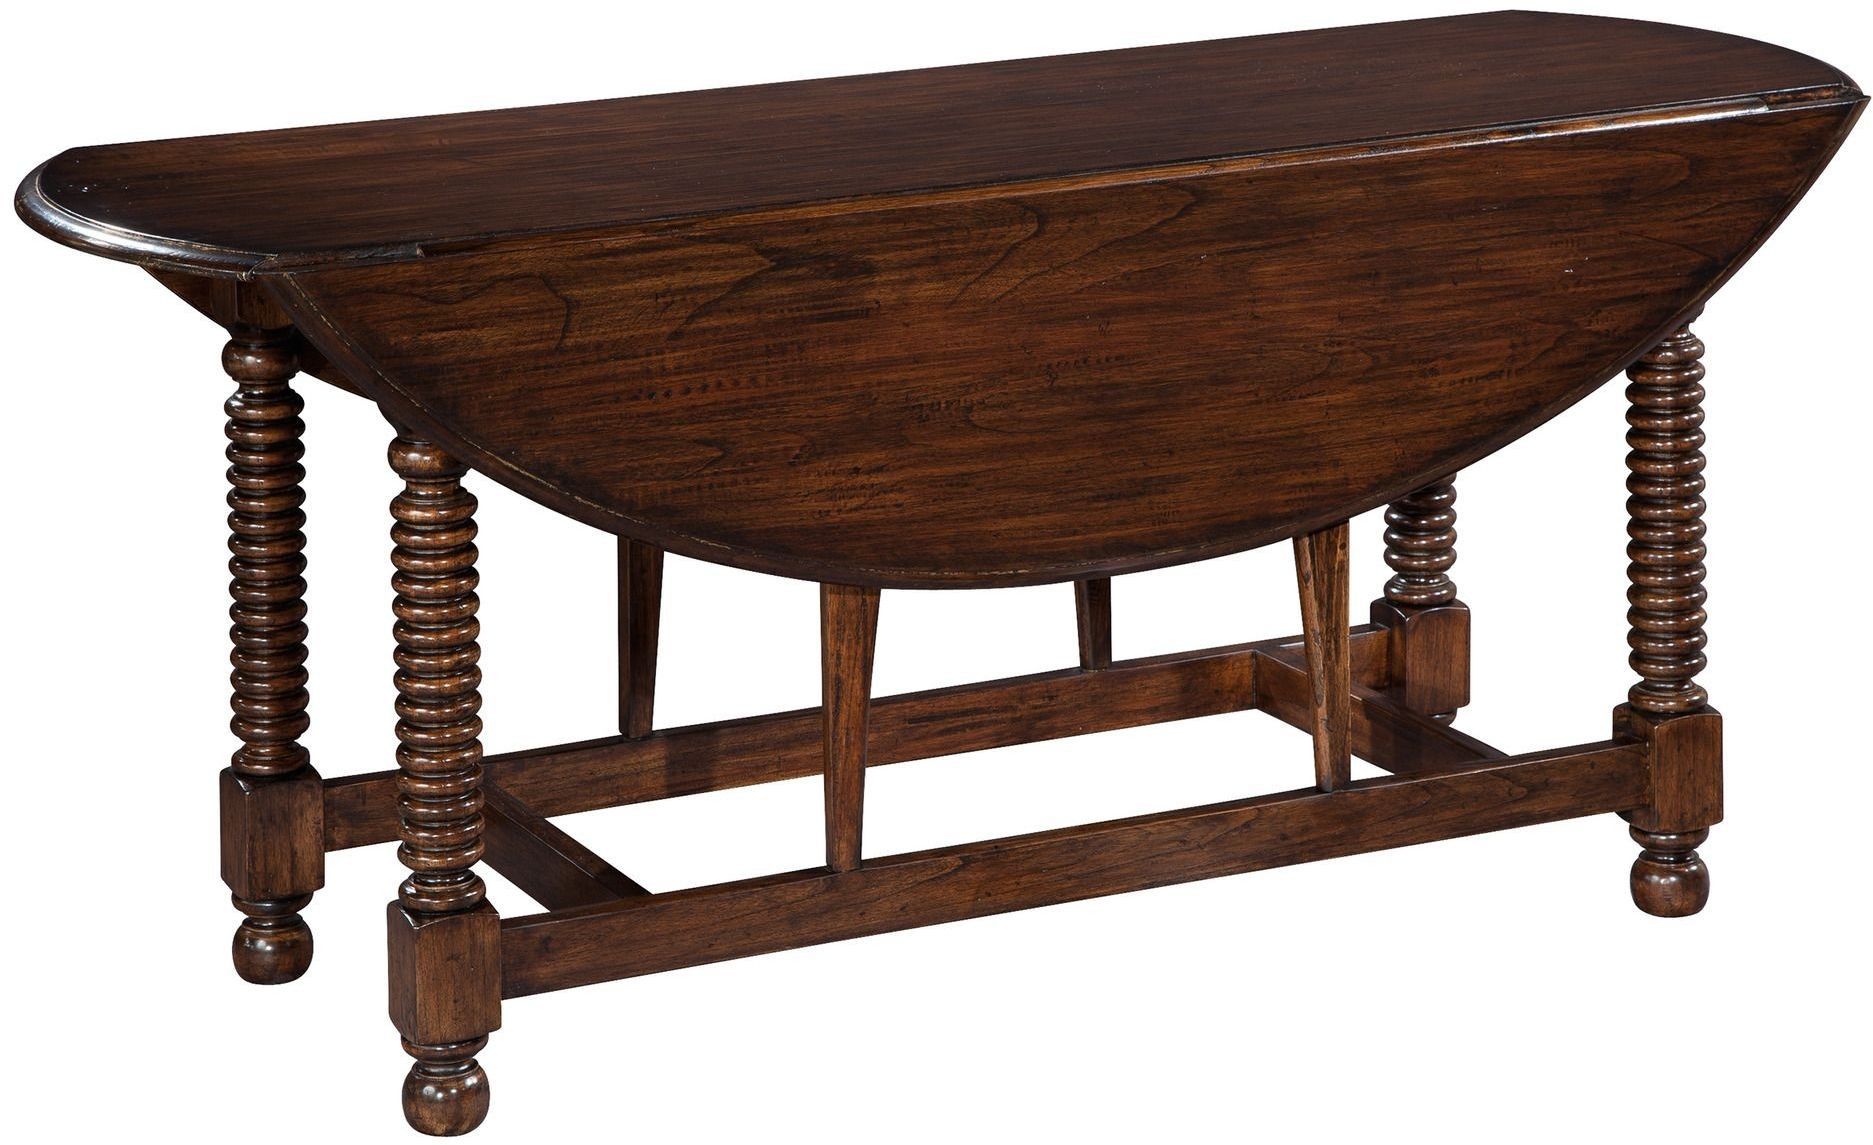 Brown Extendable Drop Leaf Console Table From Hekman In Leaf Round Console Tables (View 13 of 20)